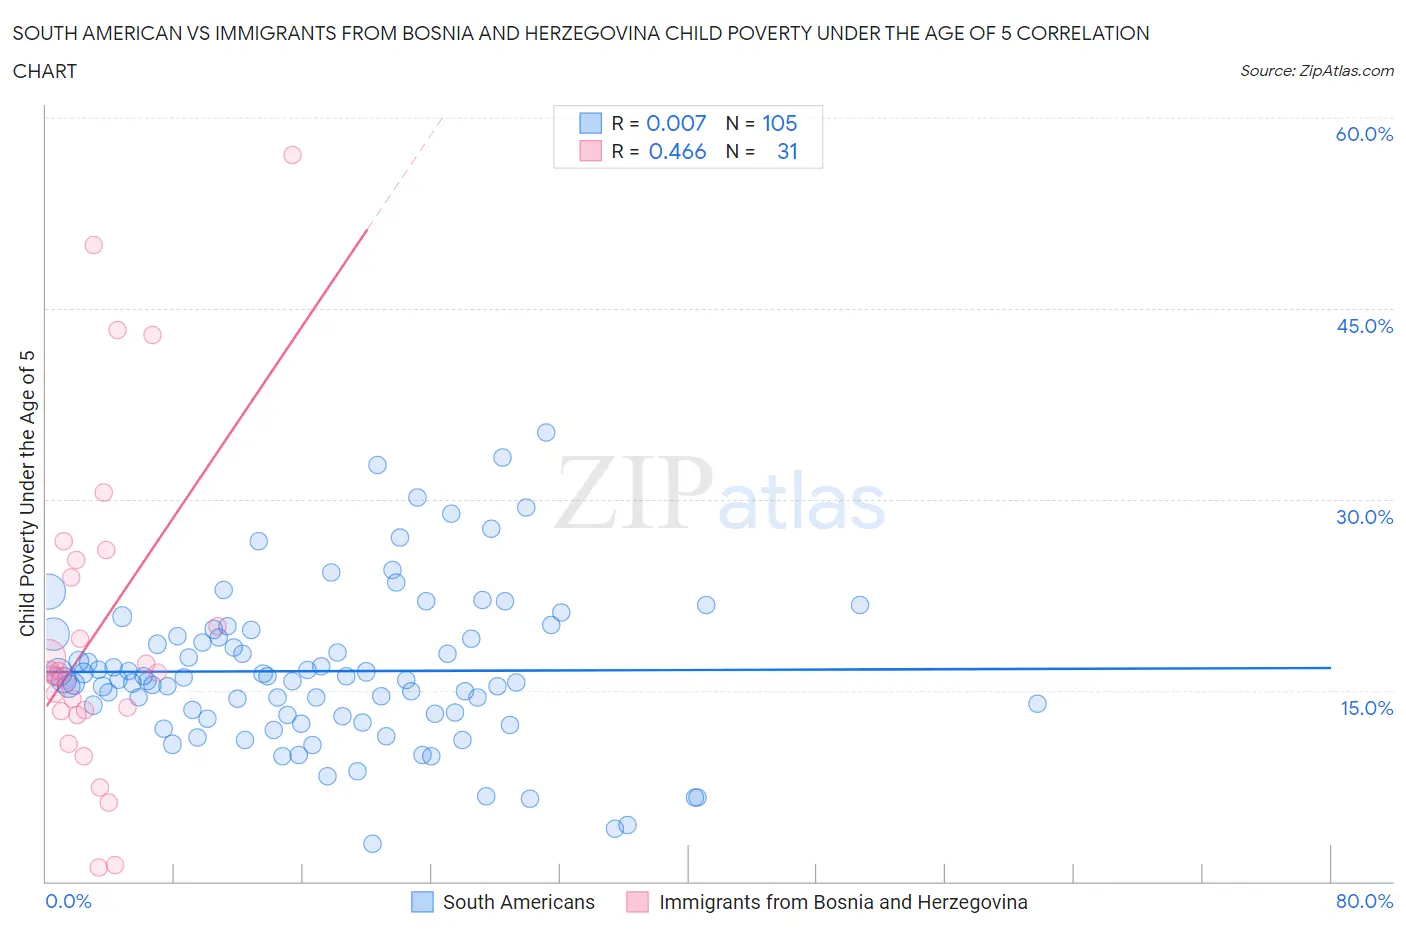 South American vs Immigrants from Bosnia and Herzegovina Child Poverty Under the Age of 5